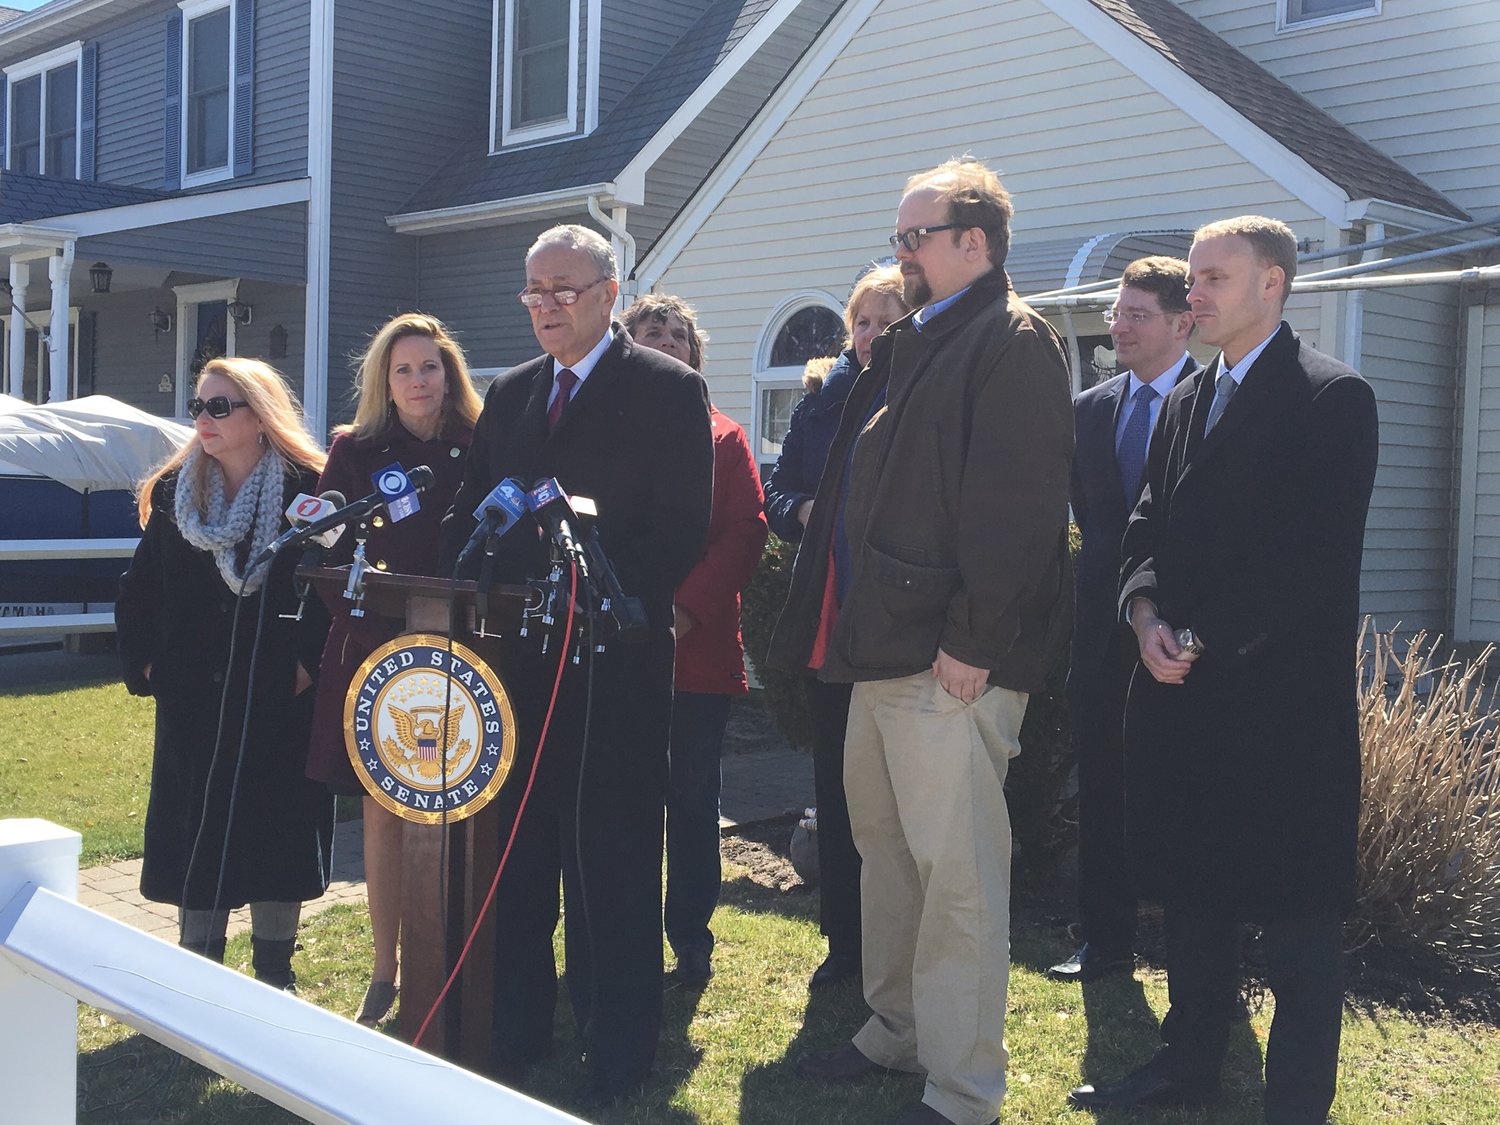 U.S. Sen. Charles Schumer was joined by residents and other elected officials in Long Beach on Monday to call on the Federal Emergency Management Agency to reconsider proposed changes to the National Flood Insurance Program.